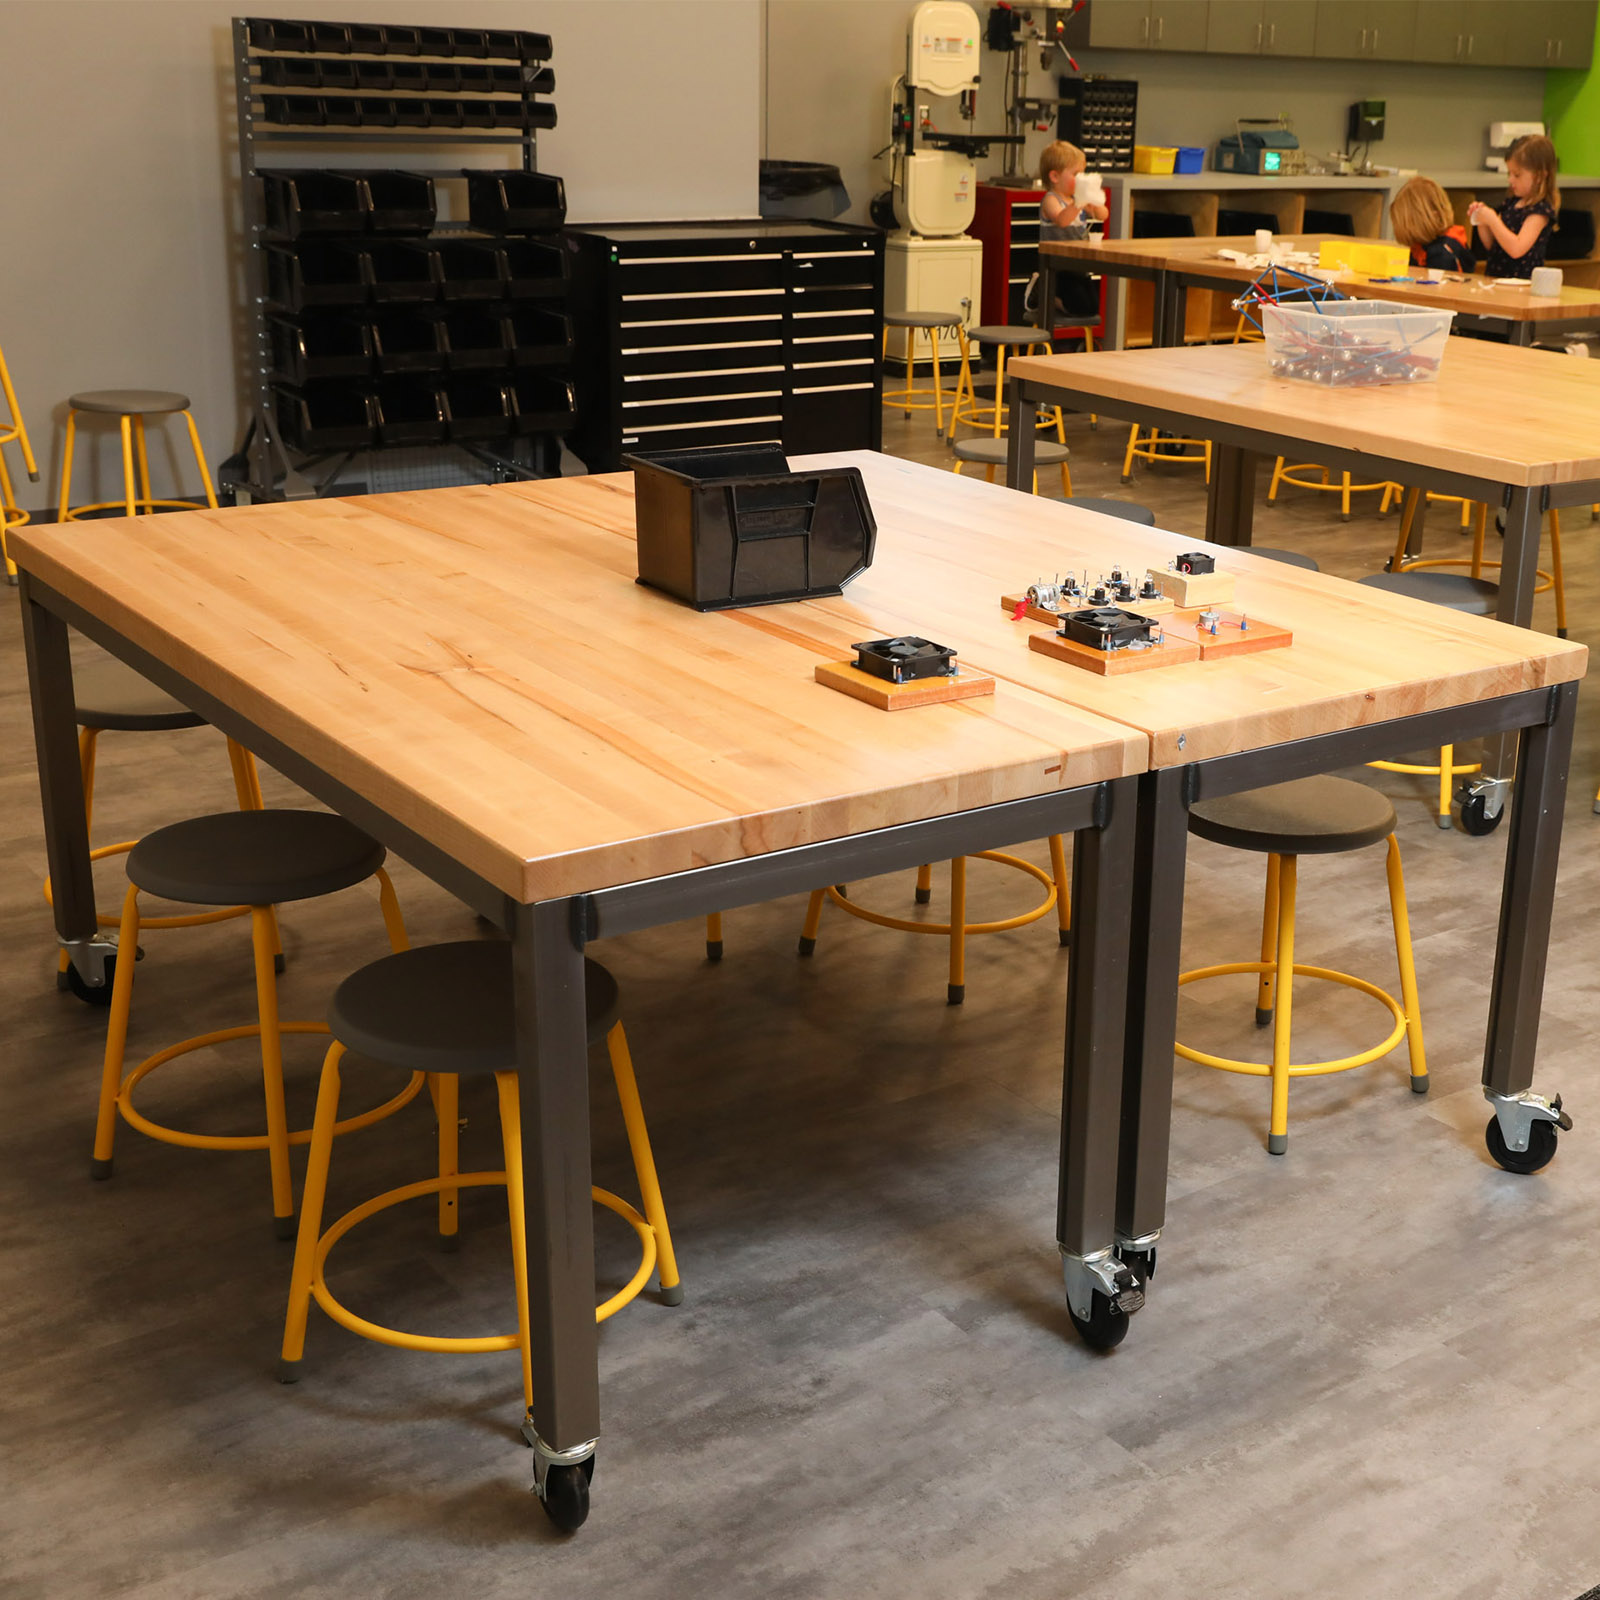 maker space tables in a children's learning environment